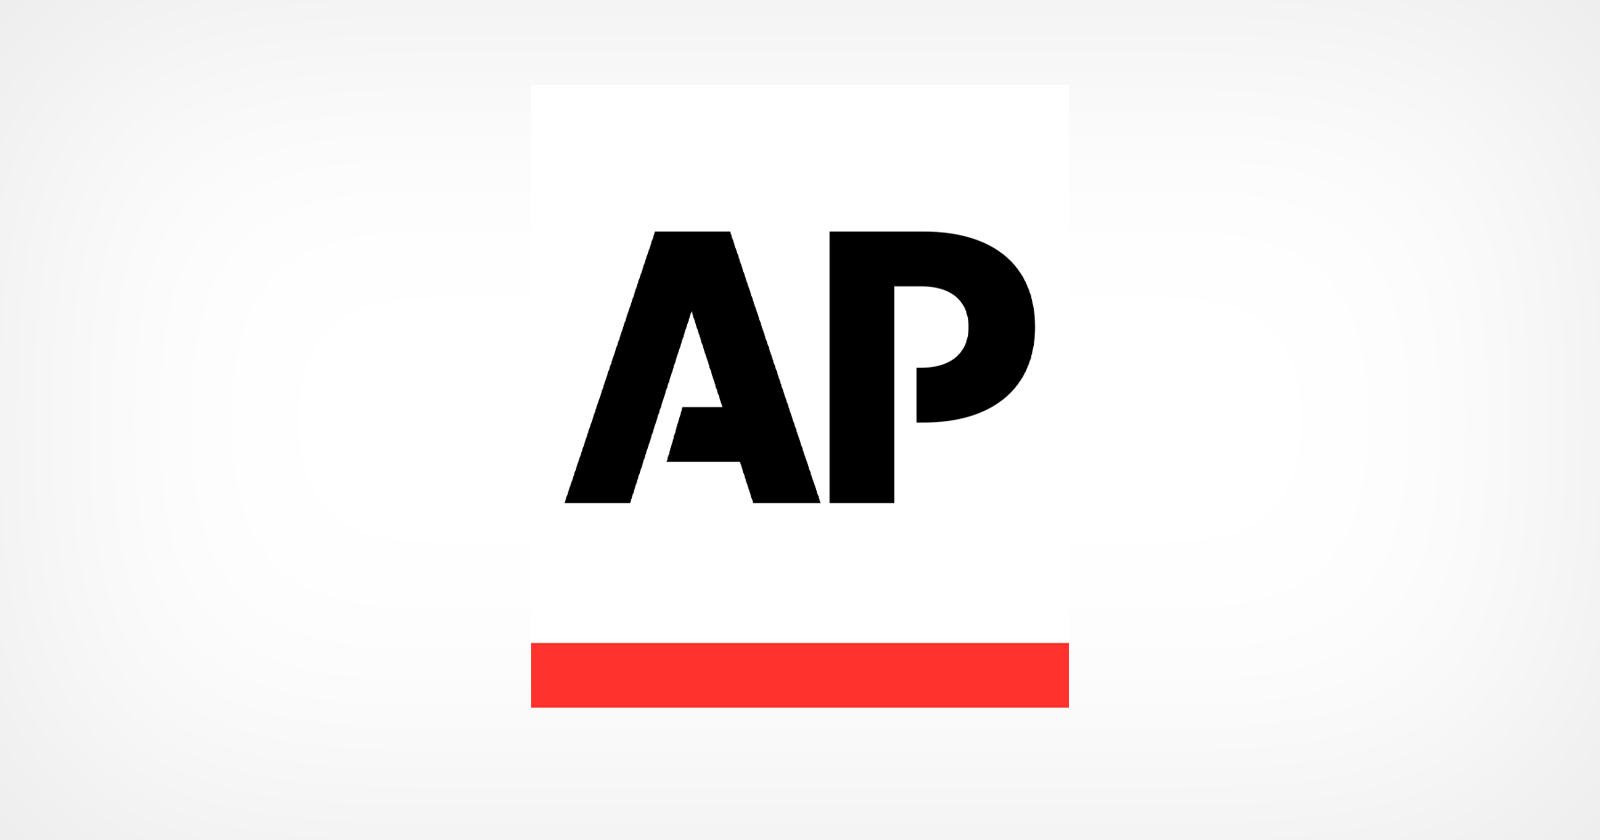 AP Cancels NFT Sale Amid Criticisms it Would Be Profiting From Suffering | PetaPixel